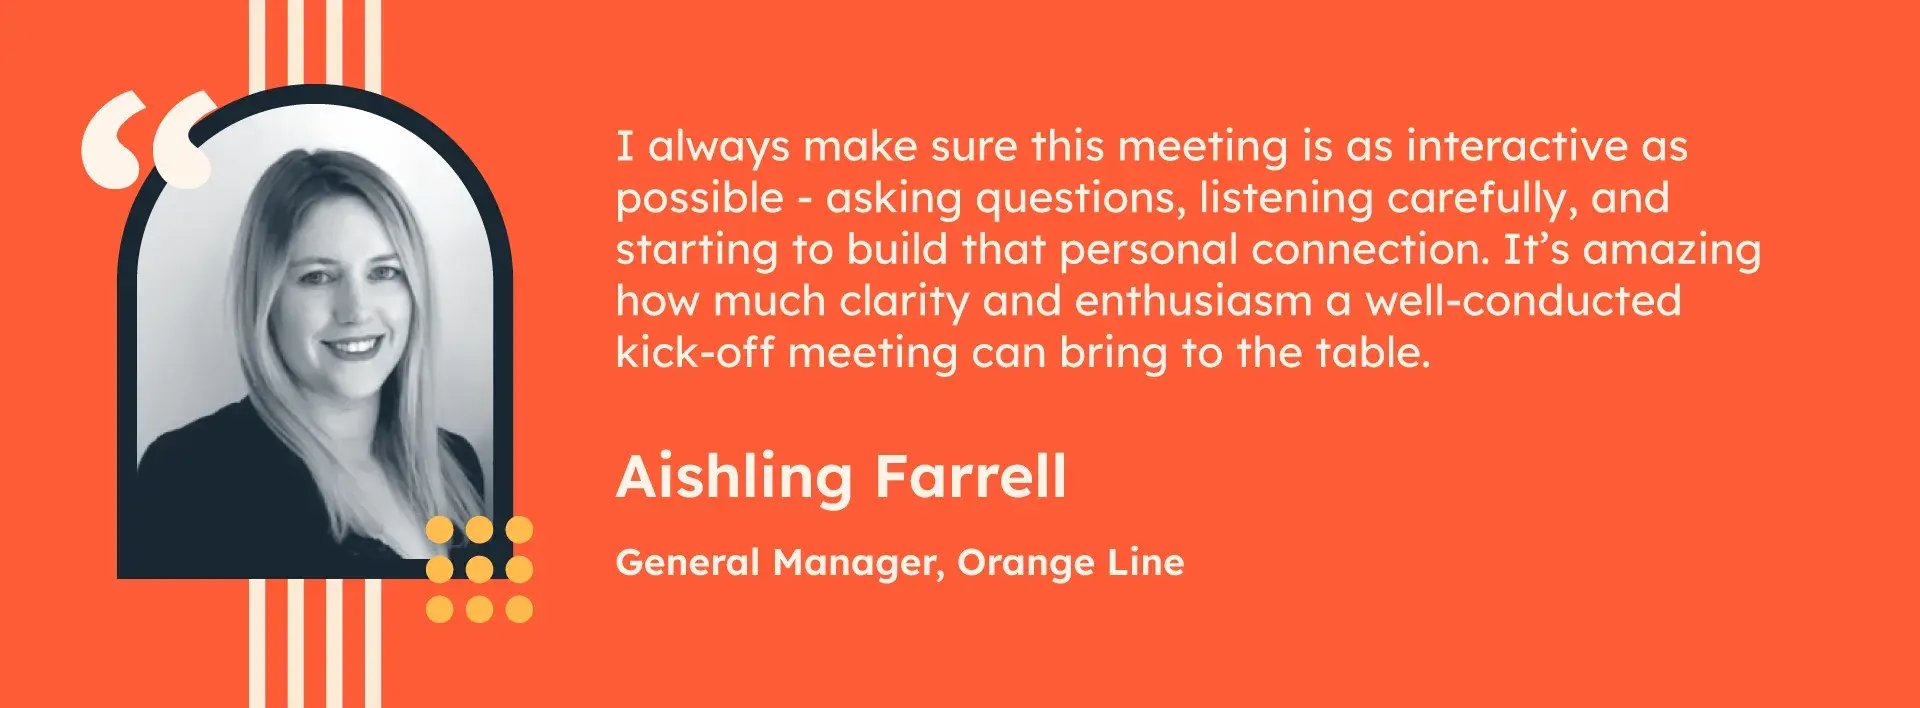 Aishling Farrell outlines the importance of building connections with customers.